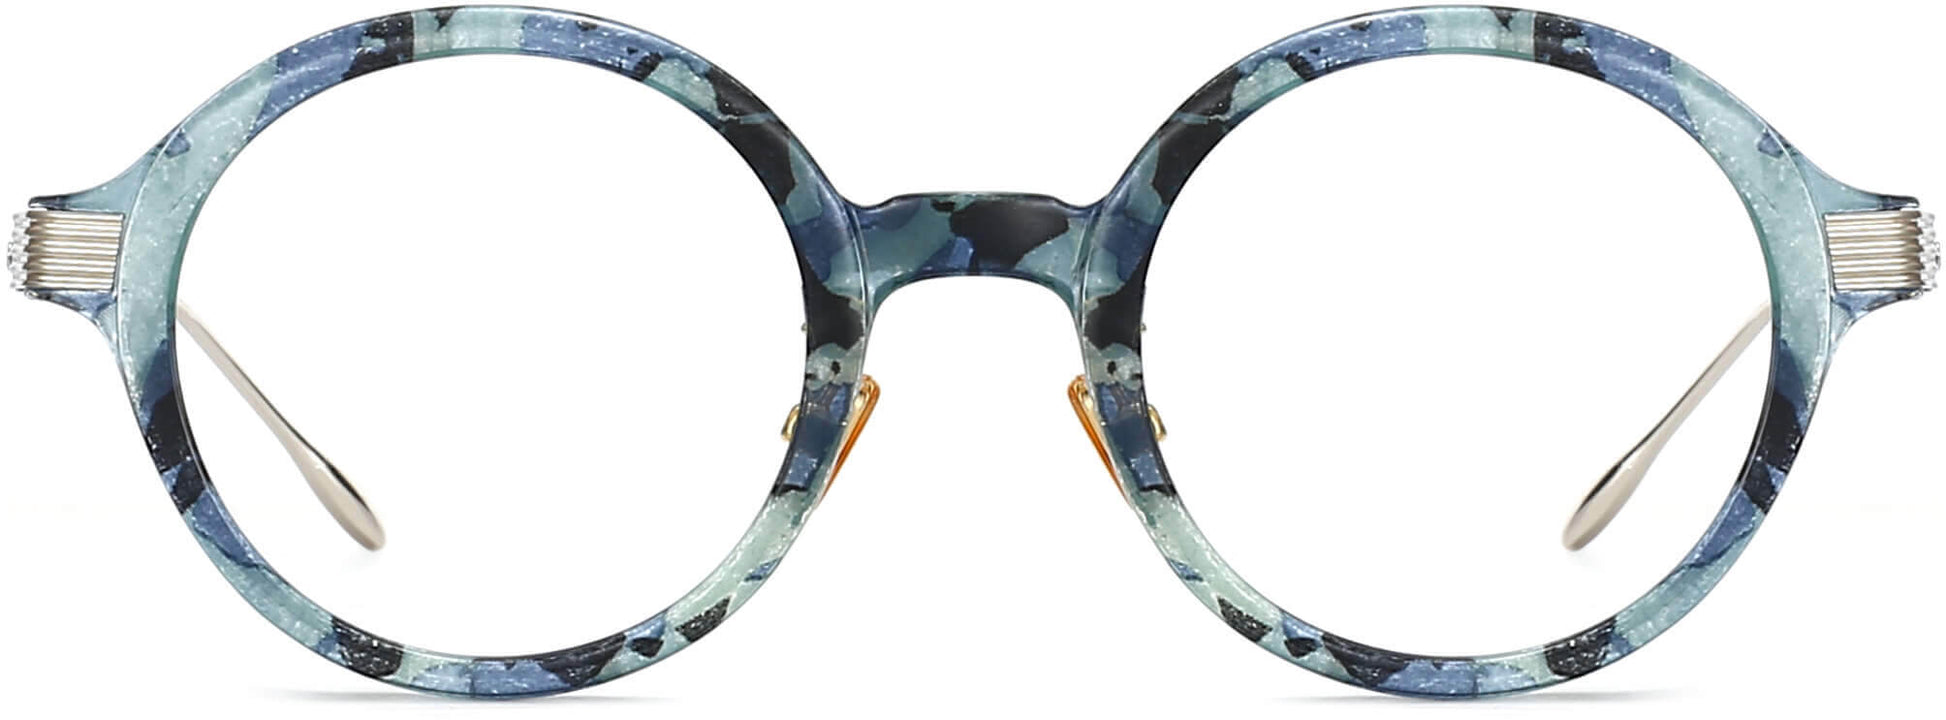 Comet Round Tortoise Eyeglasses from ANRRI, front view